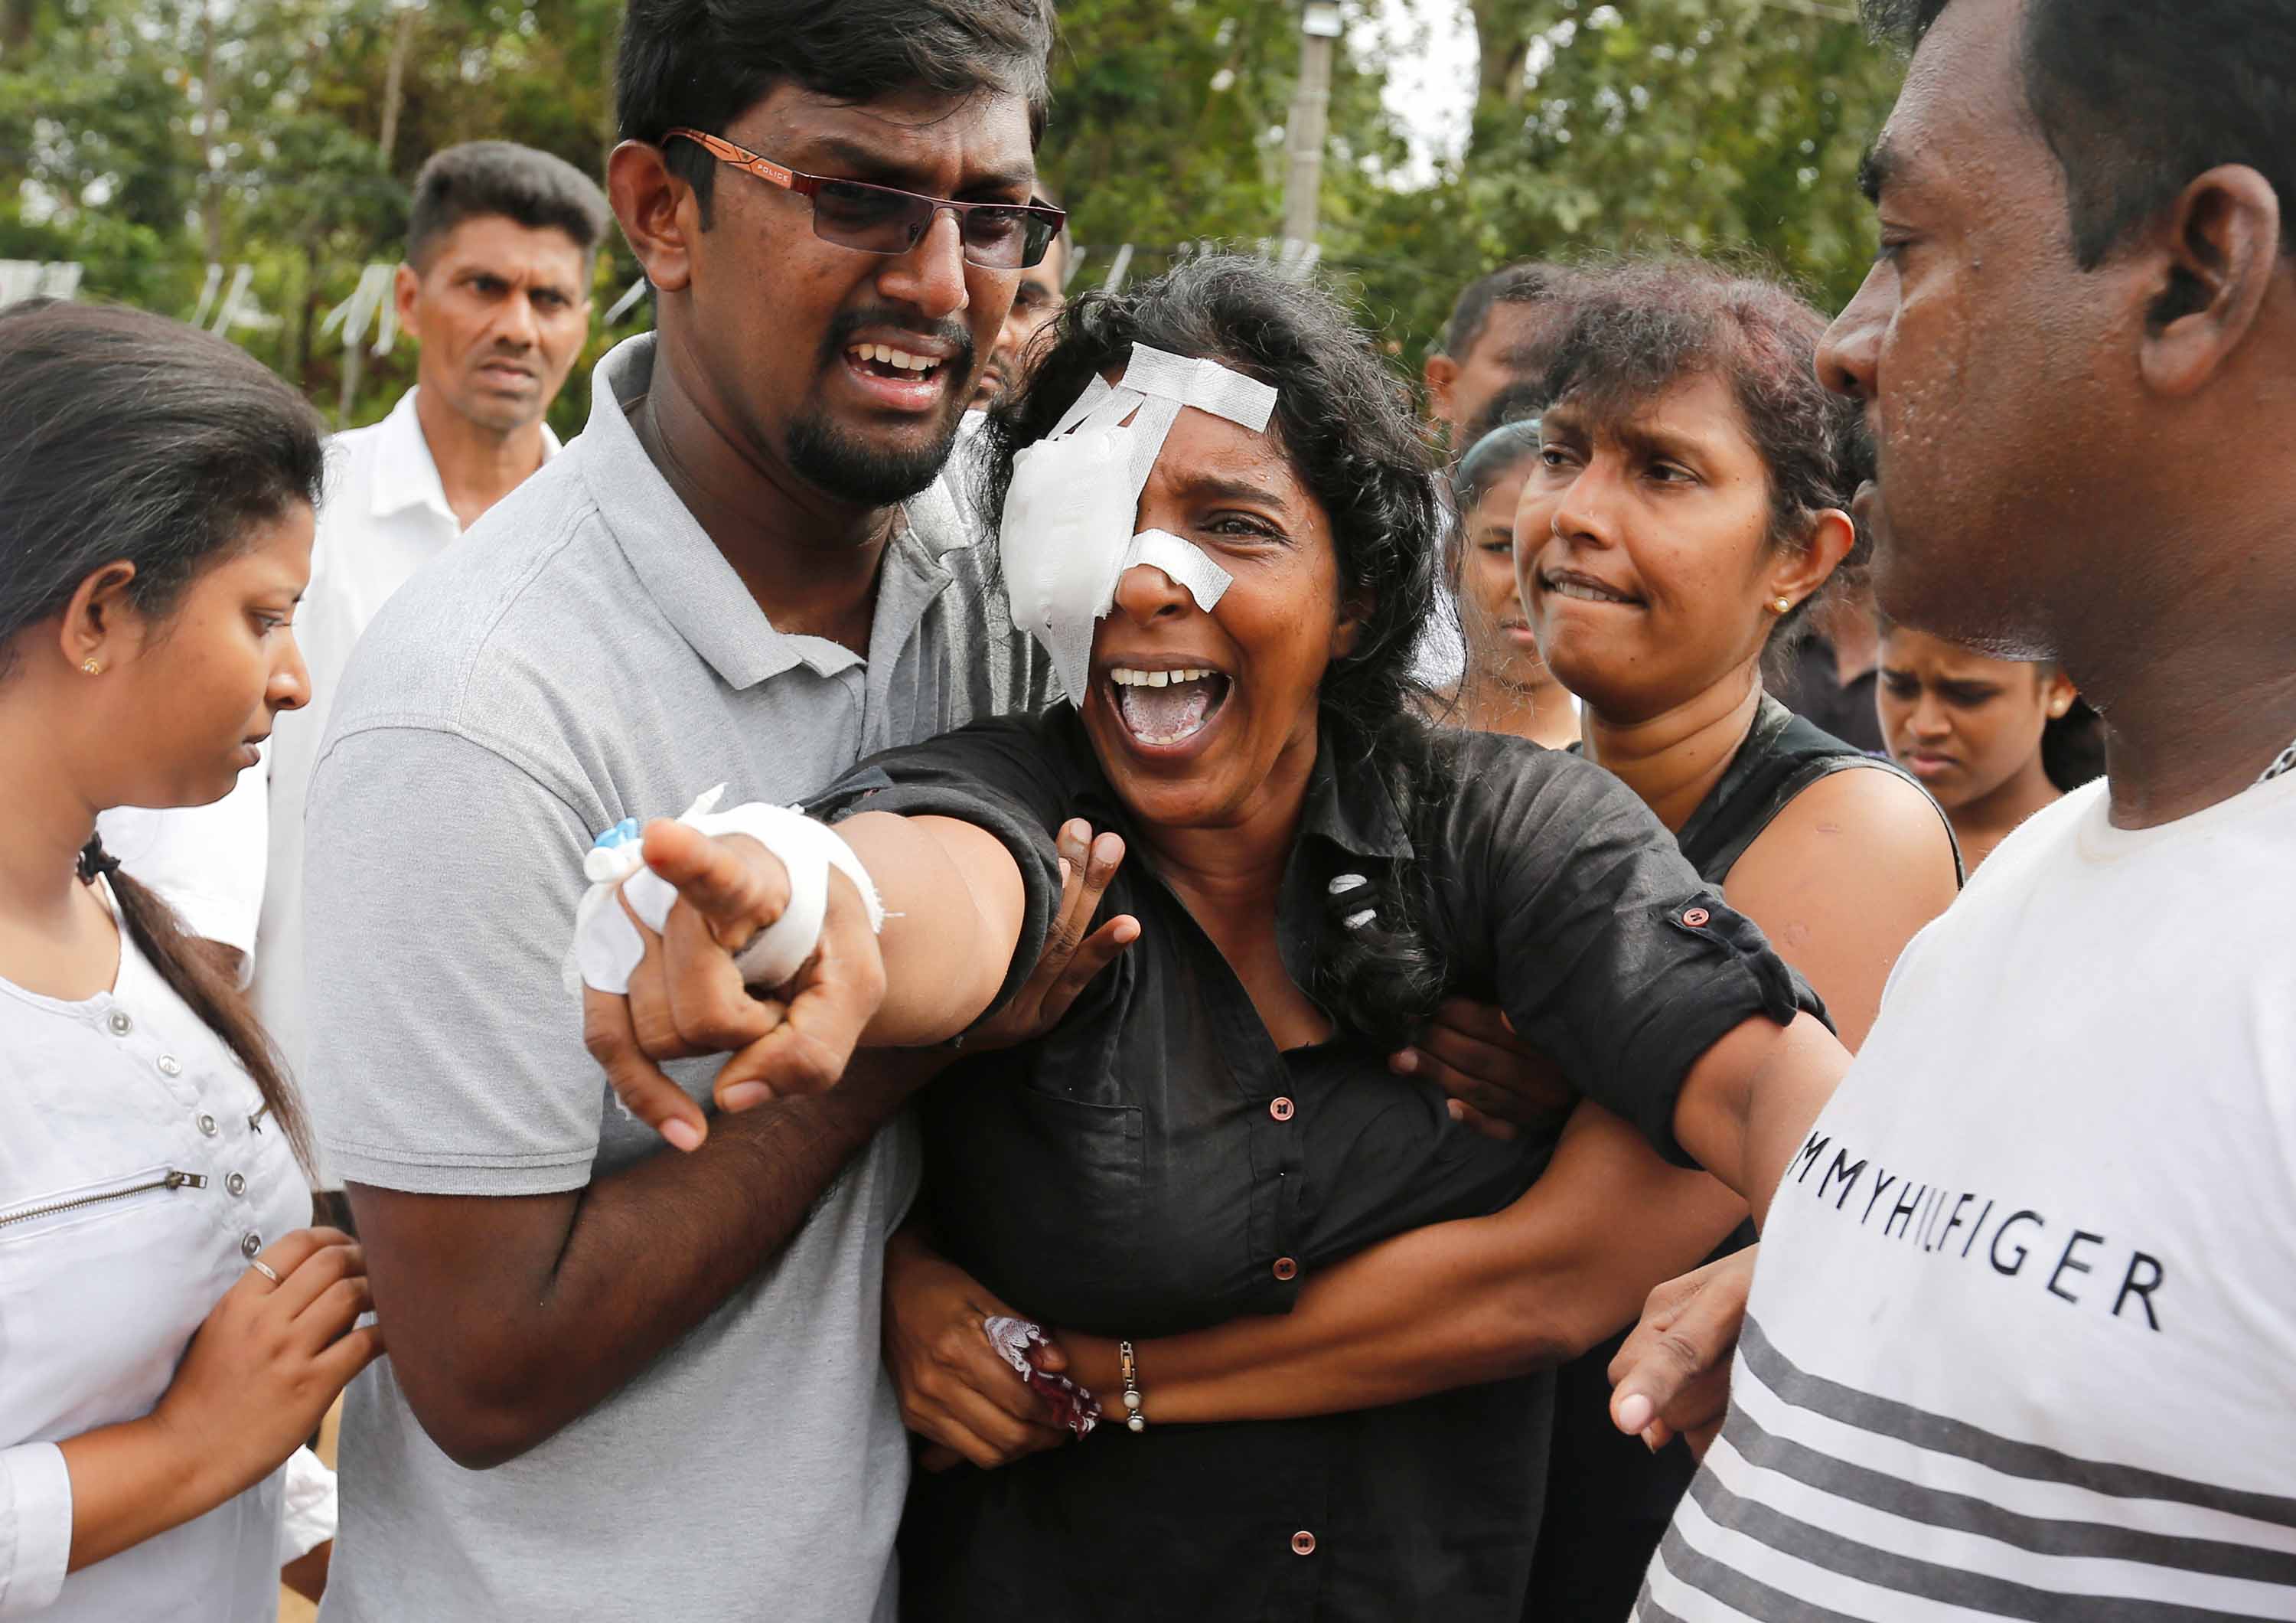 Death toll in Sri Lanka Easter attacks lowered by more than 100 - CNN